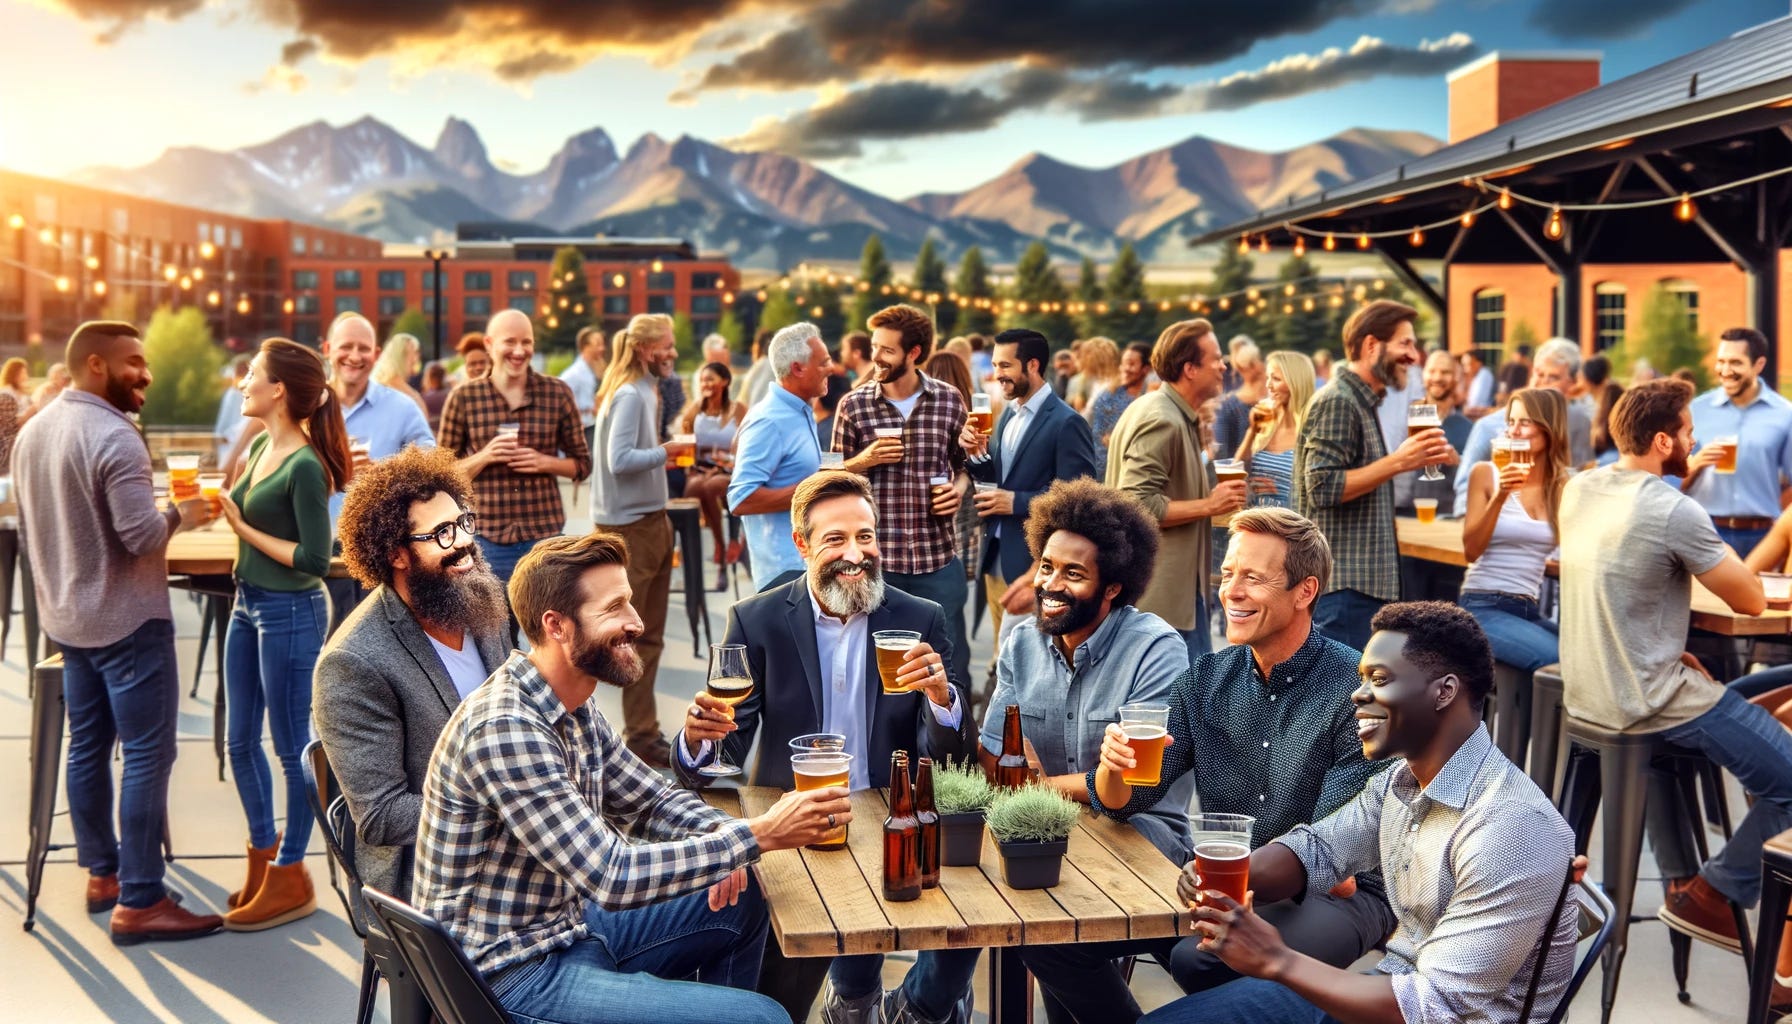 An outdoor happy hour scene with a group of diverse people including geeky men and black men, all enjoying drinks and conversation. In the background, the majestic Denver mountains are visible. The setting is lively and vibrant, with a mix of people from various backgrounds engaging in a social gathering in a picturesque outdoor environment.